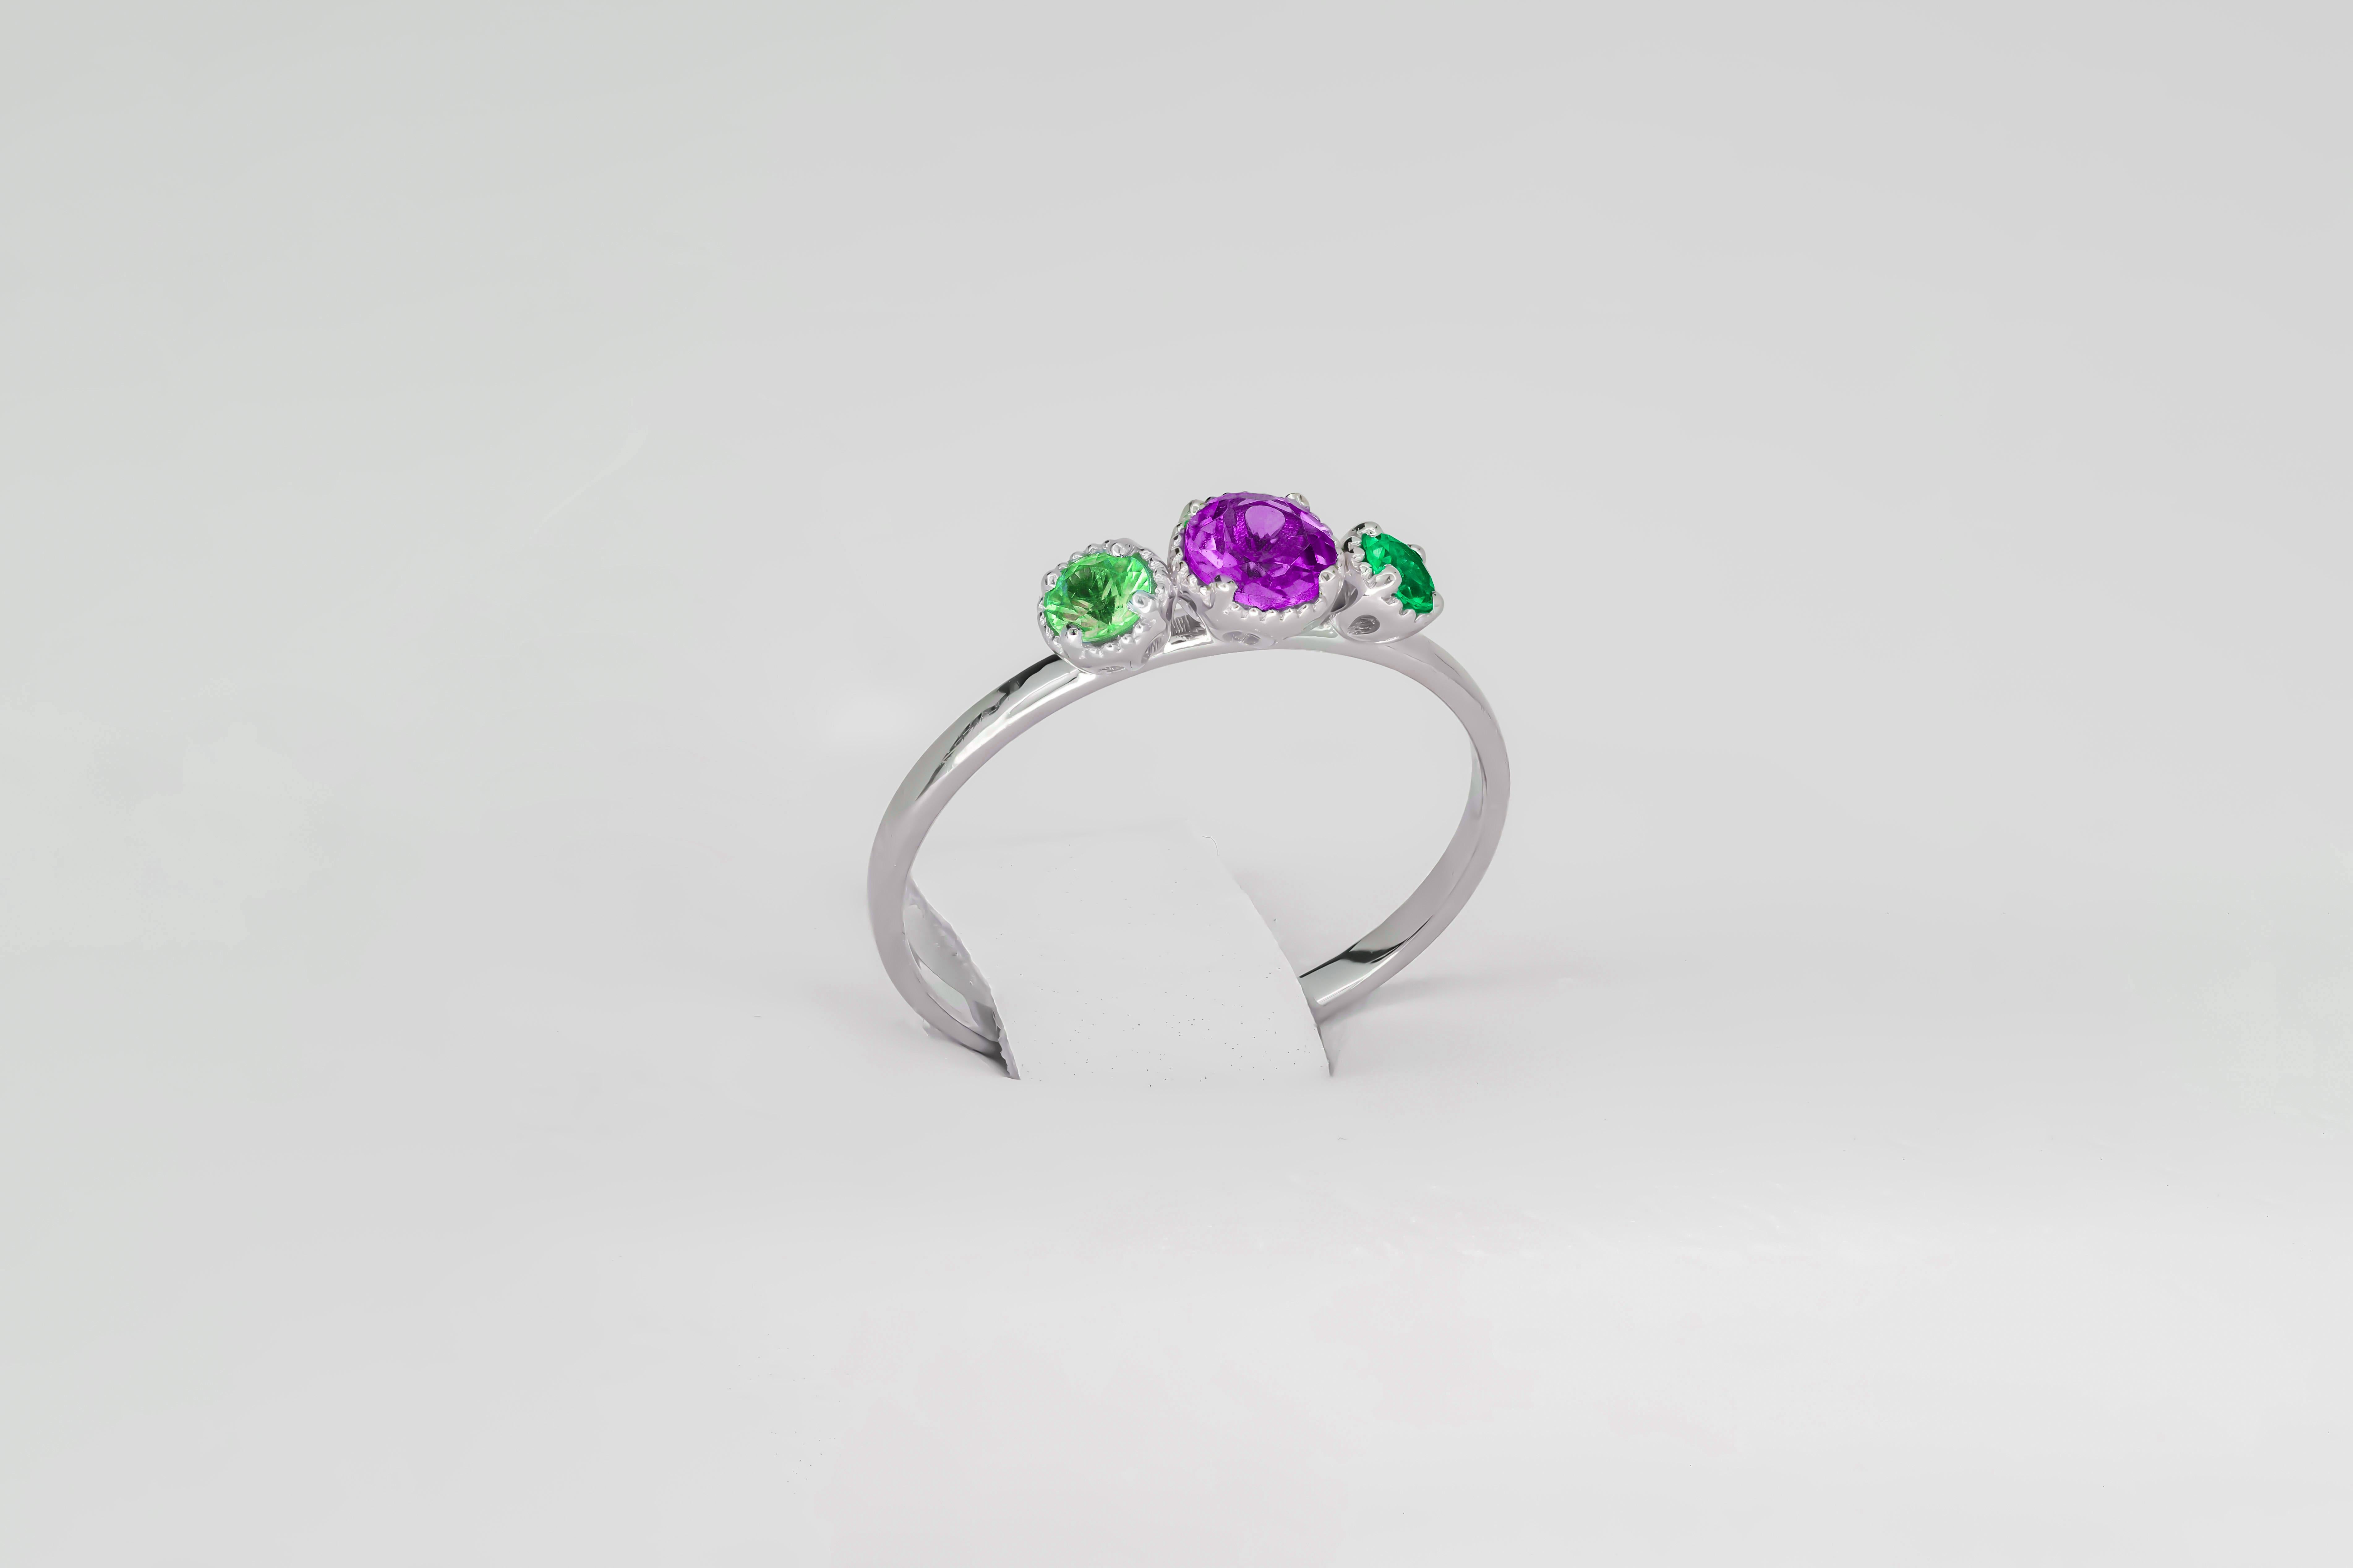 For Sale:  Green and purple gem 14k gold ring. 4